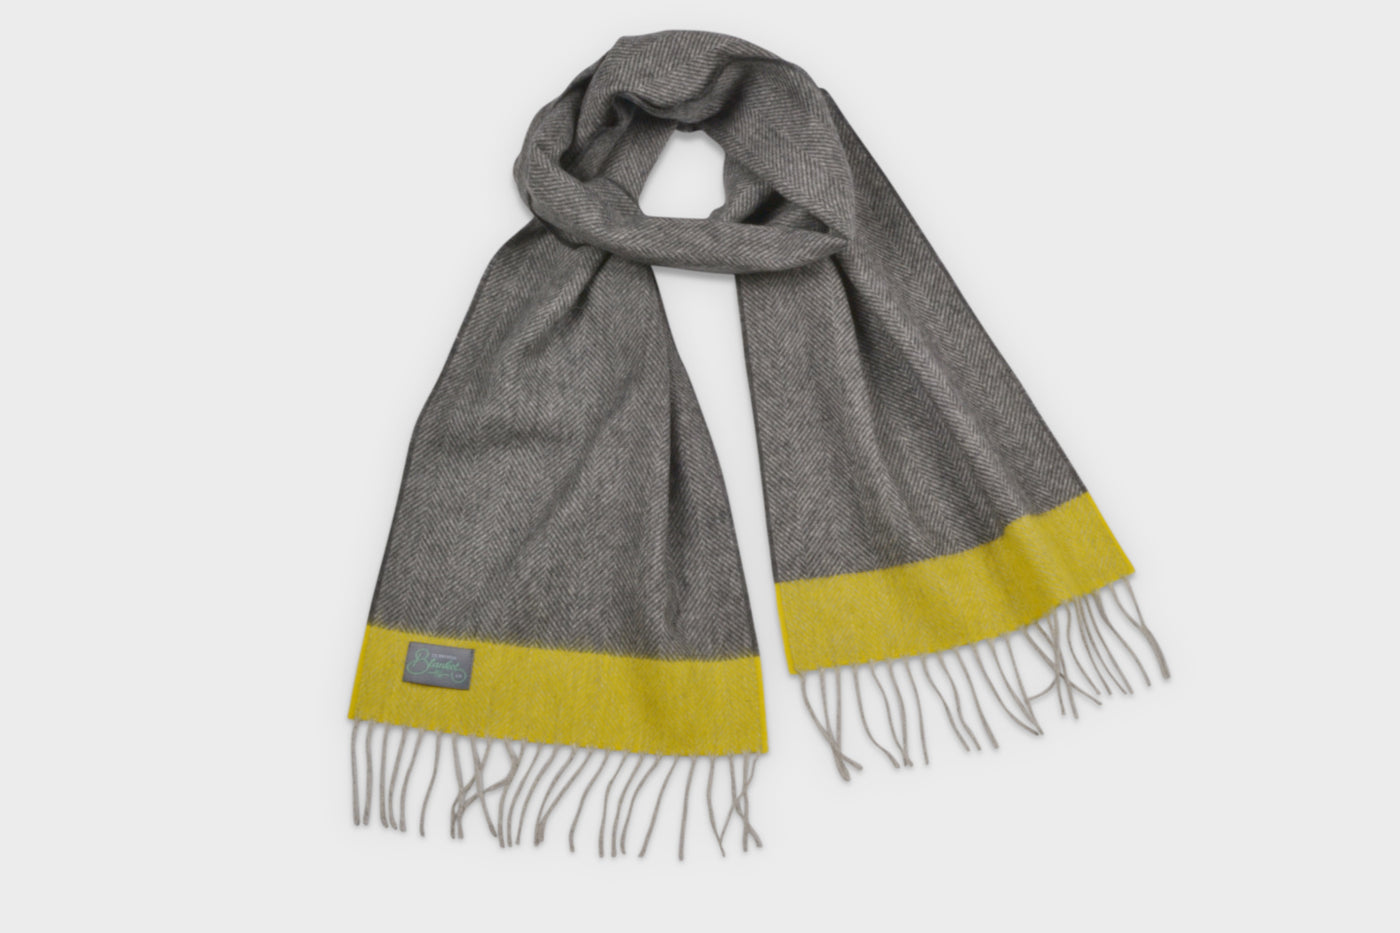 Grey and yellow lambswool scarf by The British Blanket Company